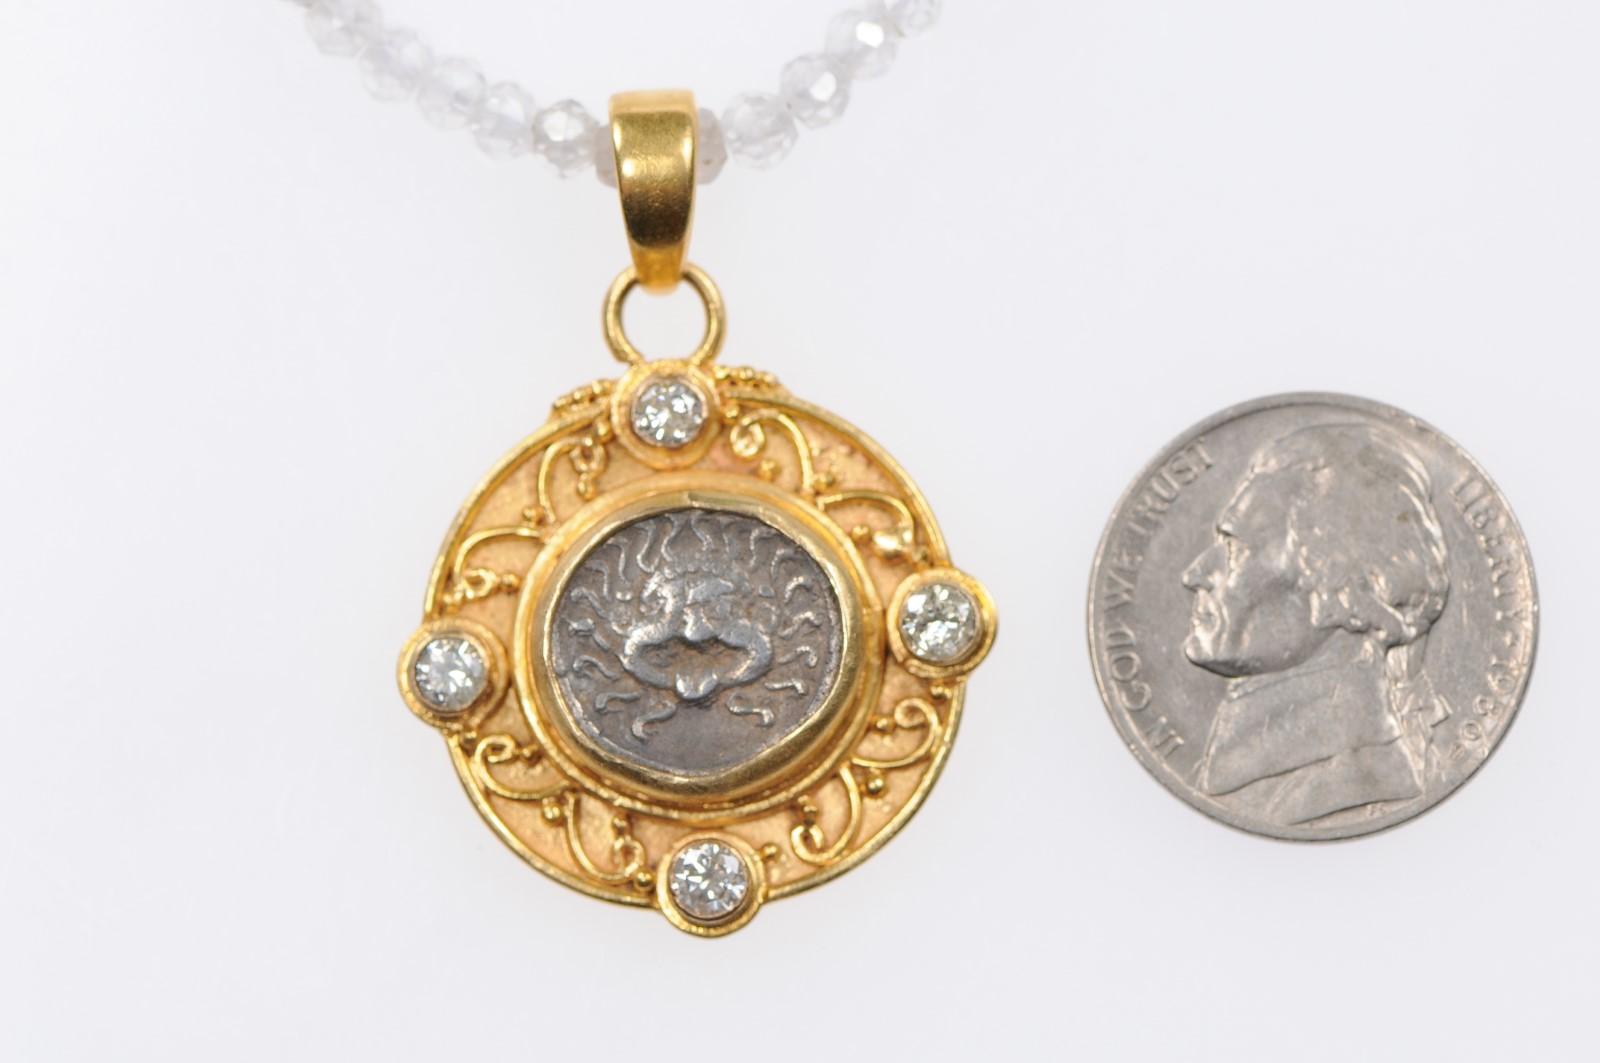 An authentic Greek Apollonia Pontika, AR Drachm Coin (late 5th-4th centuries BC), which has been artisan set within a custom 22-karat gold bezel, with a thick perimeter surround which is adorn with gold scrolls and beads. Decorative accent diamonds